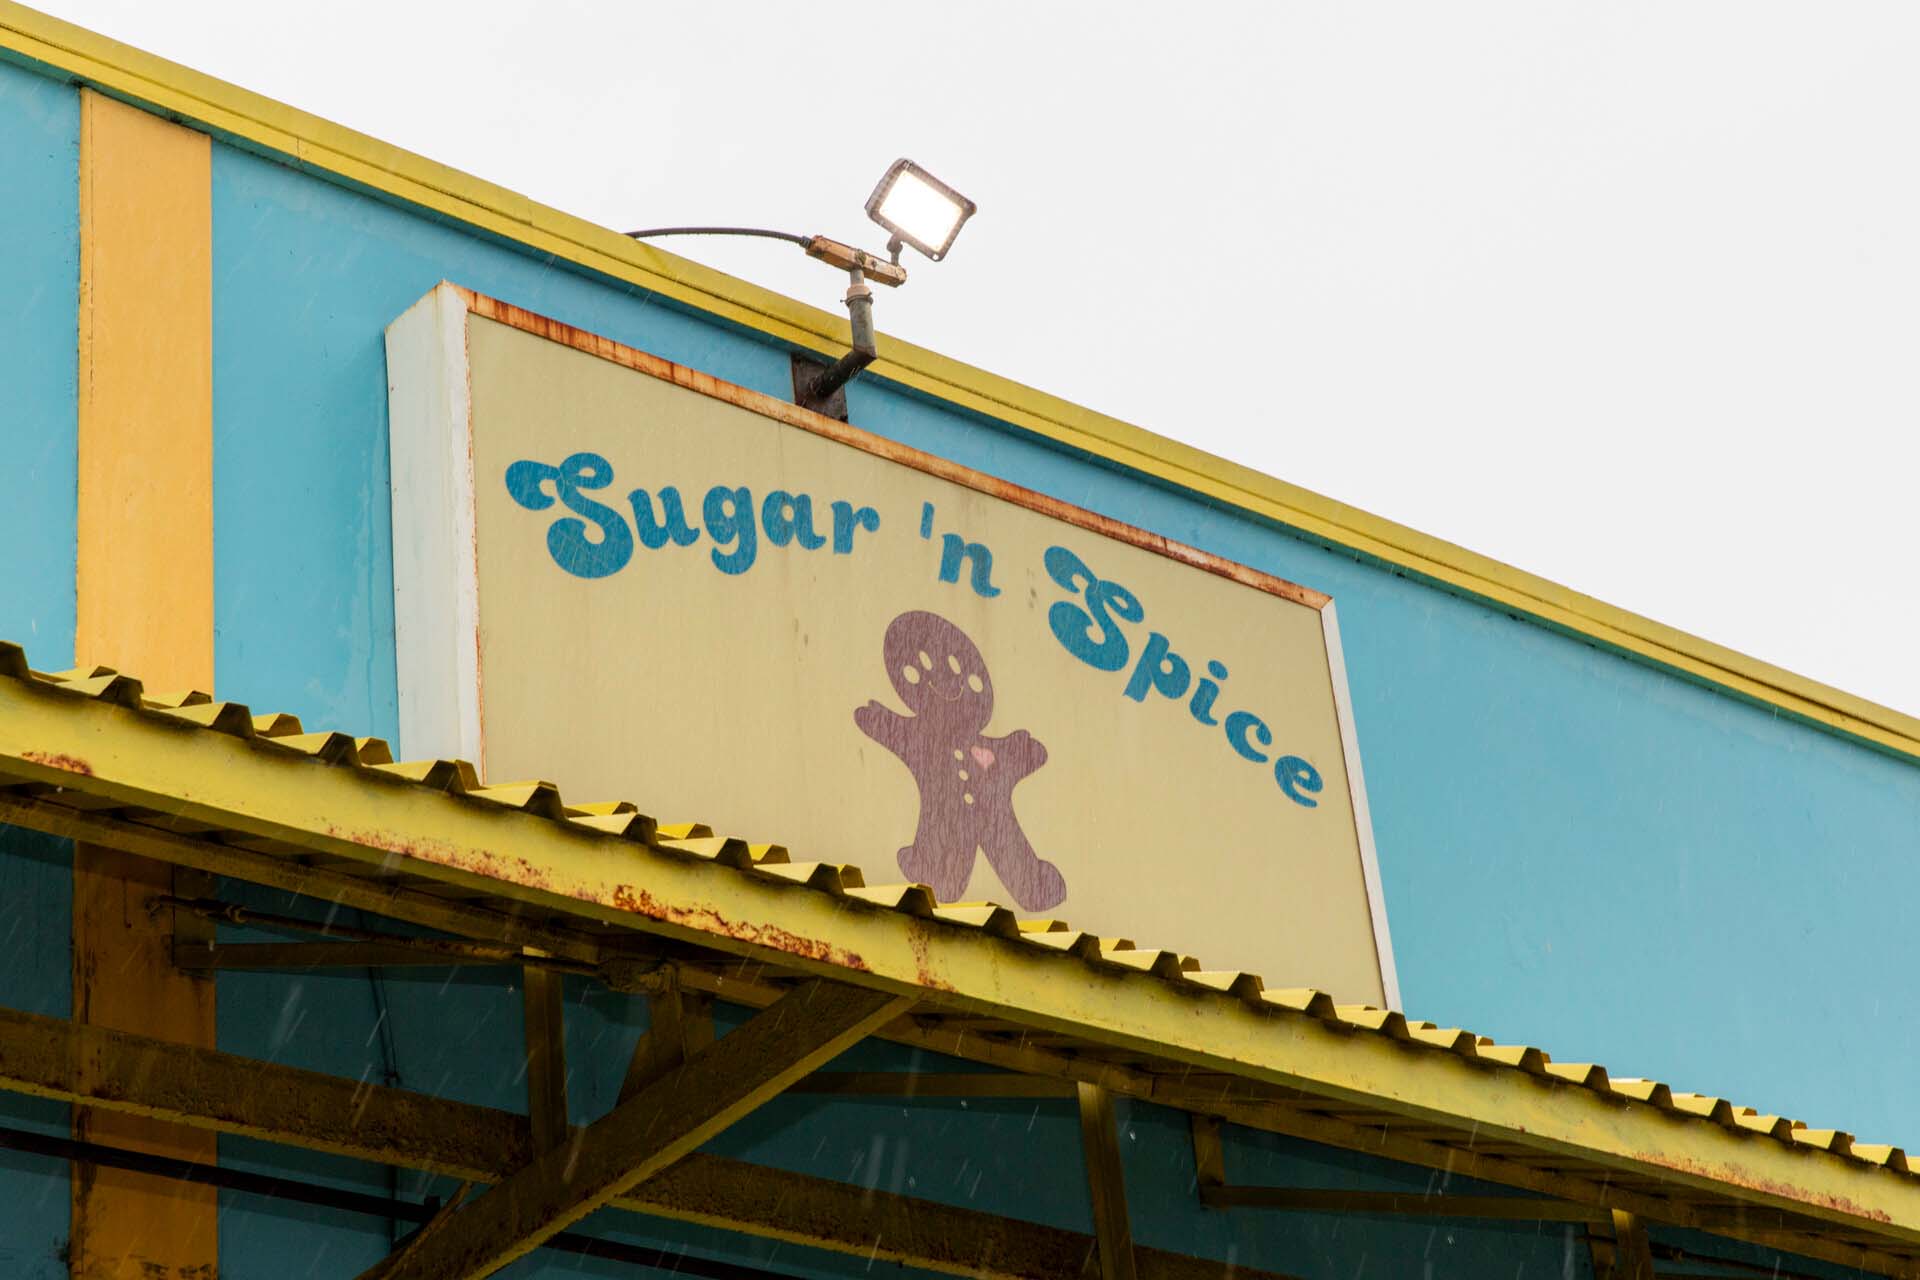 The sign outside a baking supply shop reads "Sugar 'n Spice" with a picture of a gingerbread man underneath.